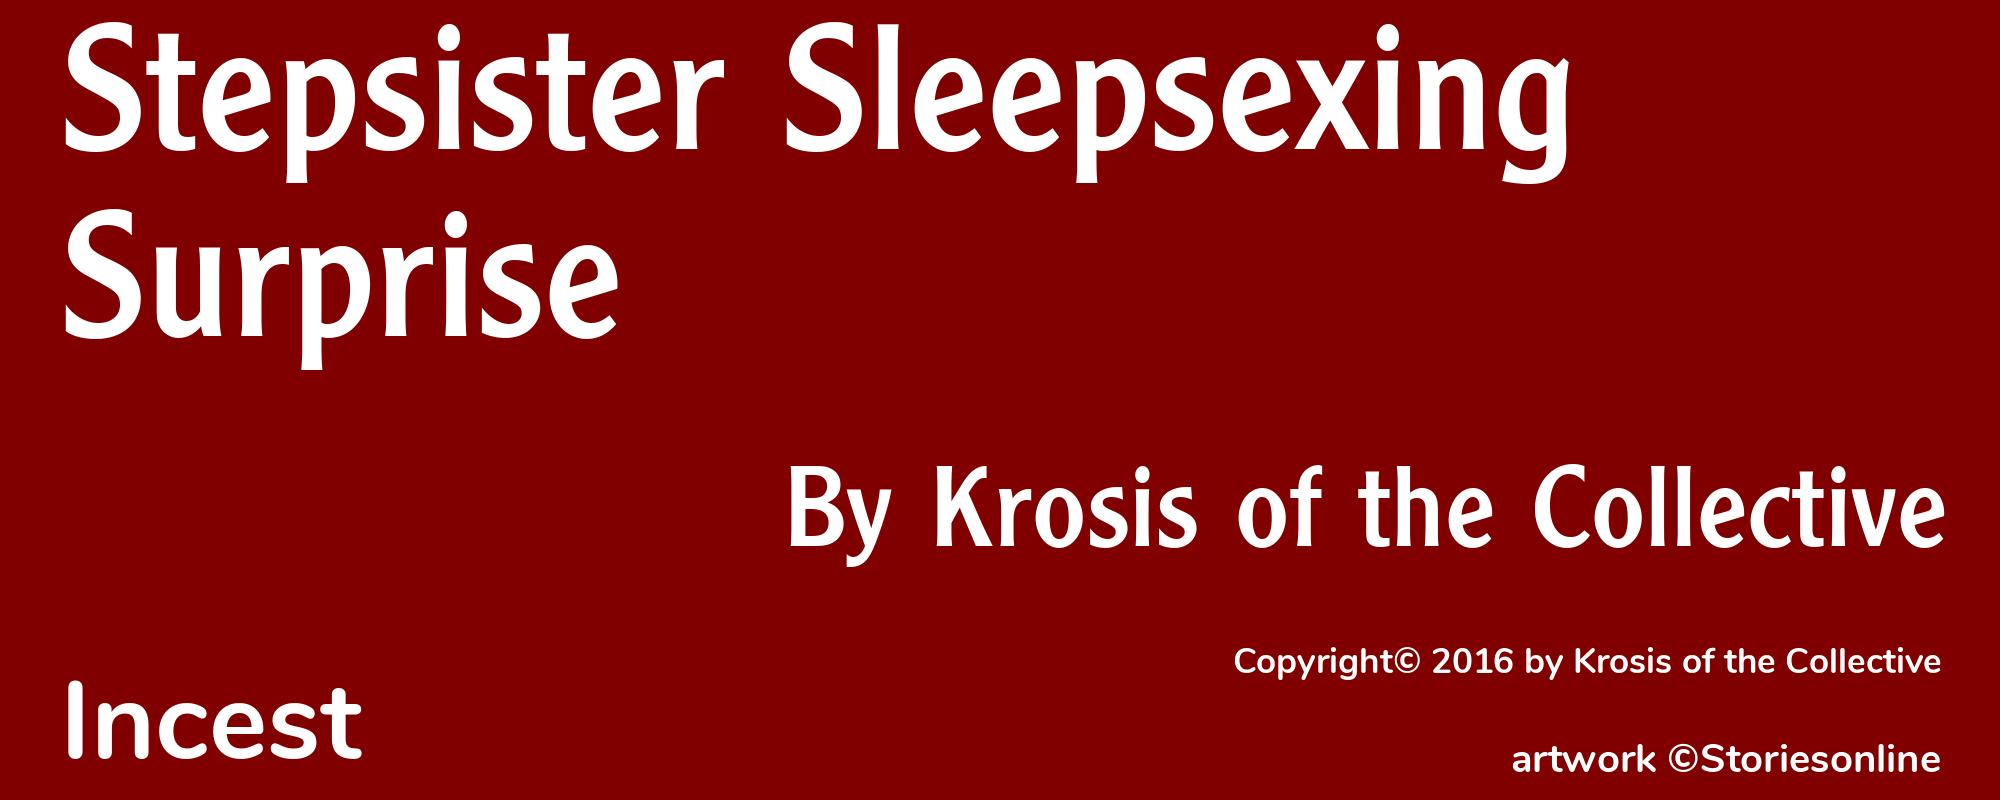 Stepsister Sleepsexing Surprise - Cover